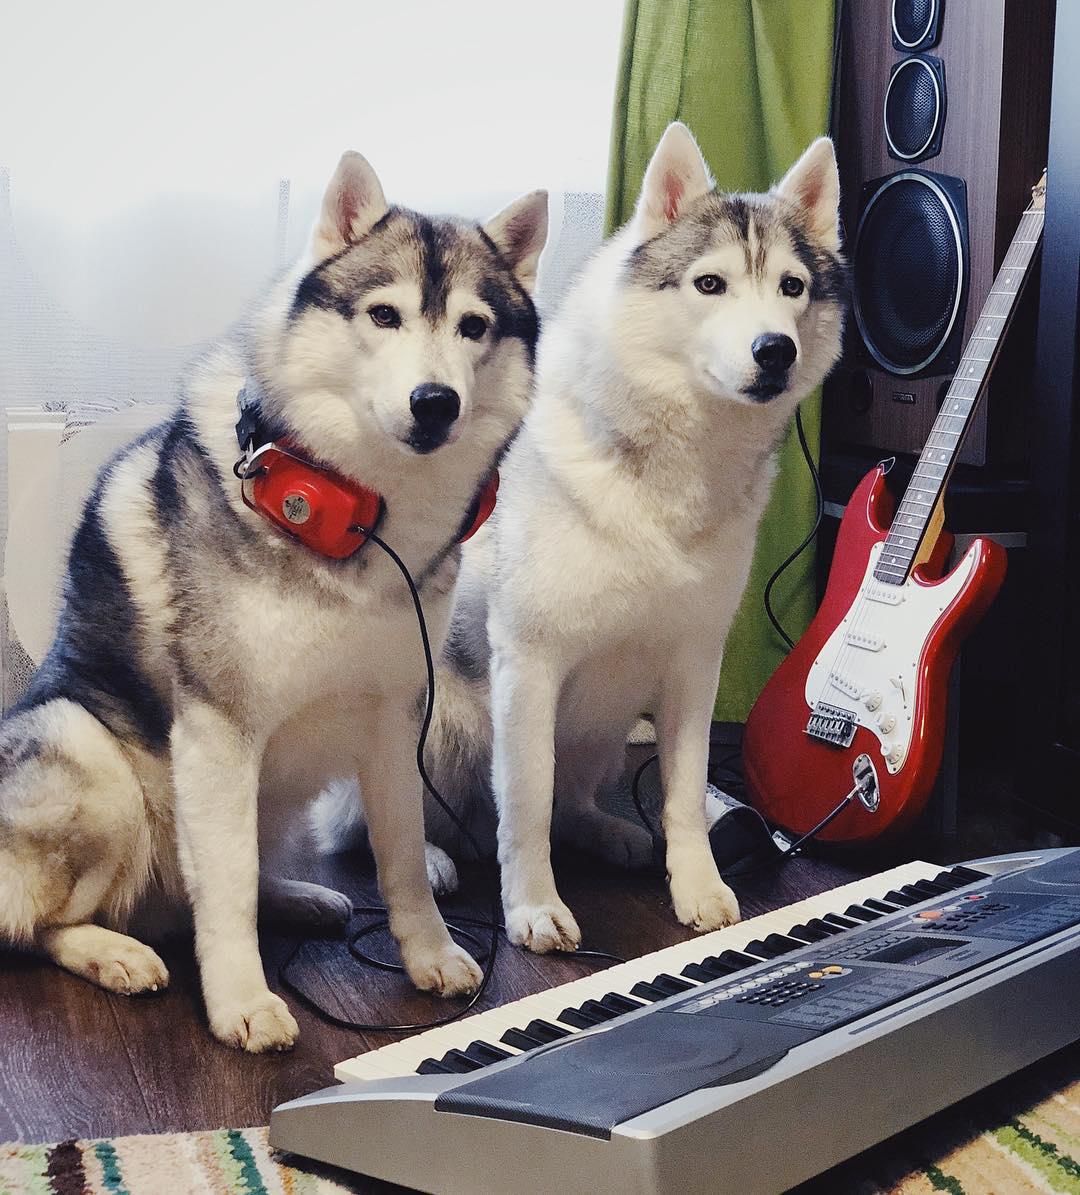 two Huskies sitting on the floor in front of a piano and next to the guitar and speakers